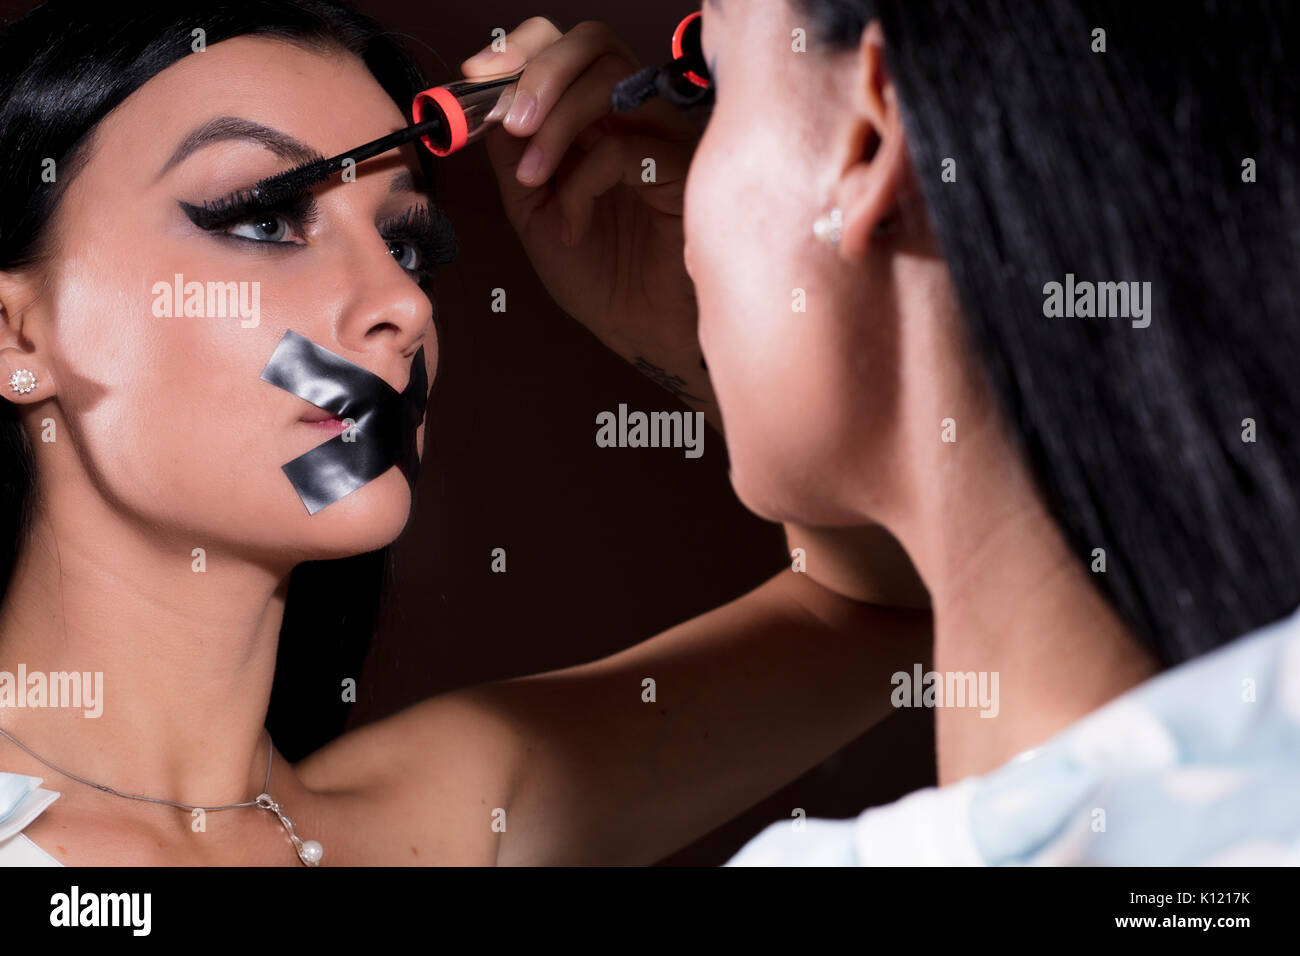 Woman applying makeup on with tape on her mouth Stock Photo